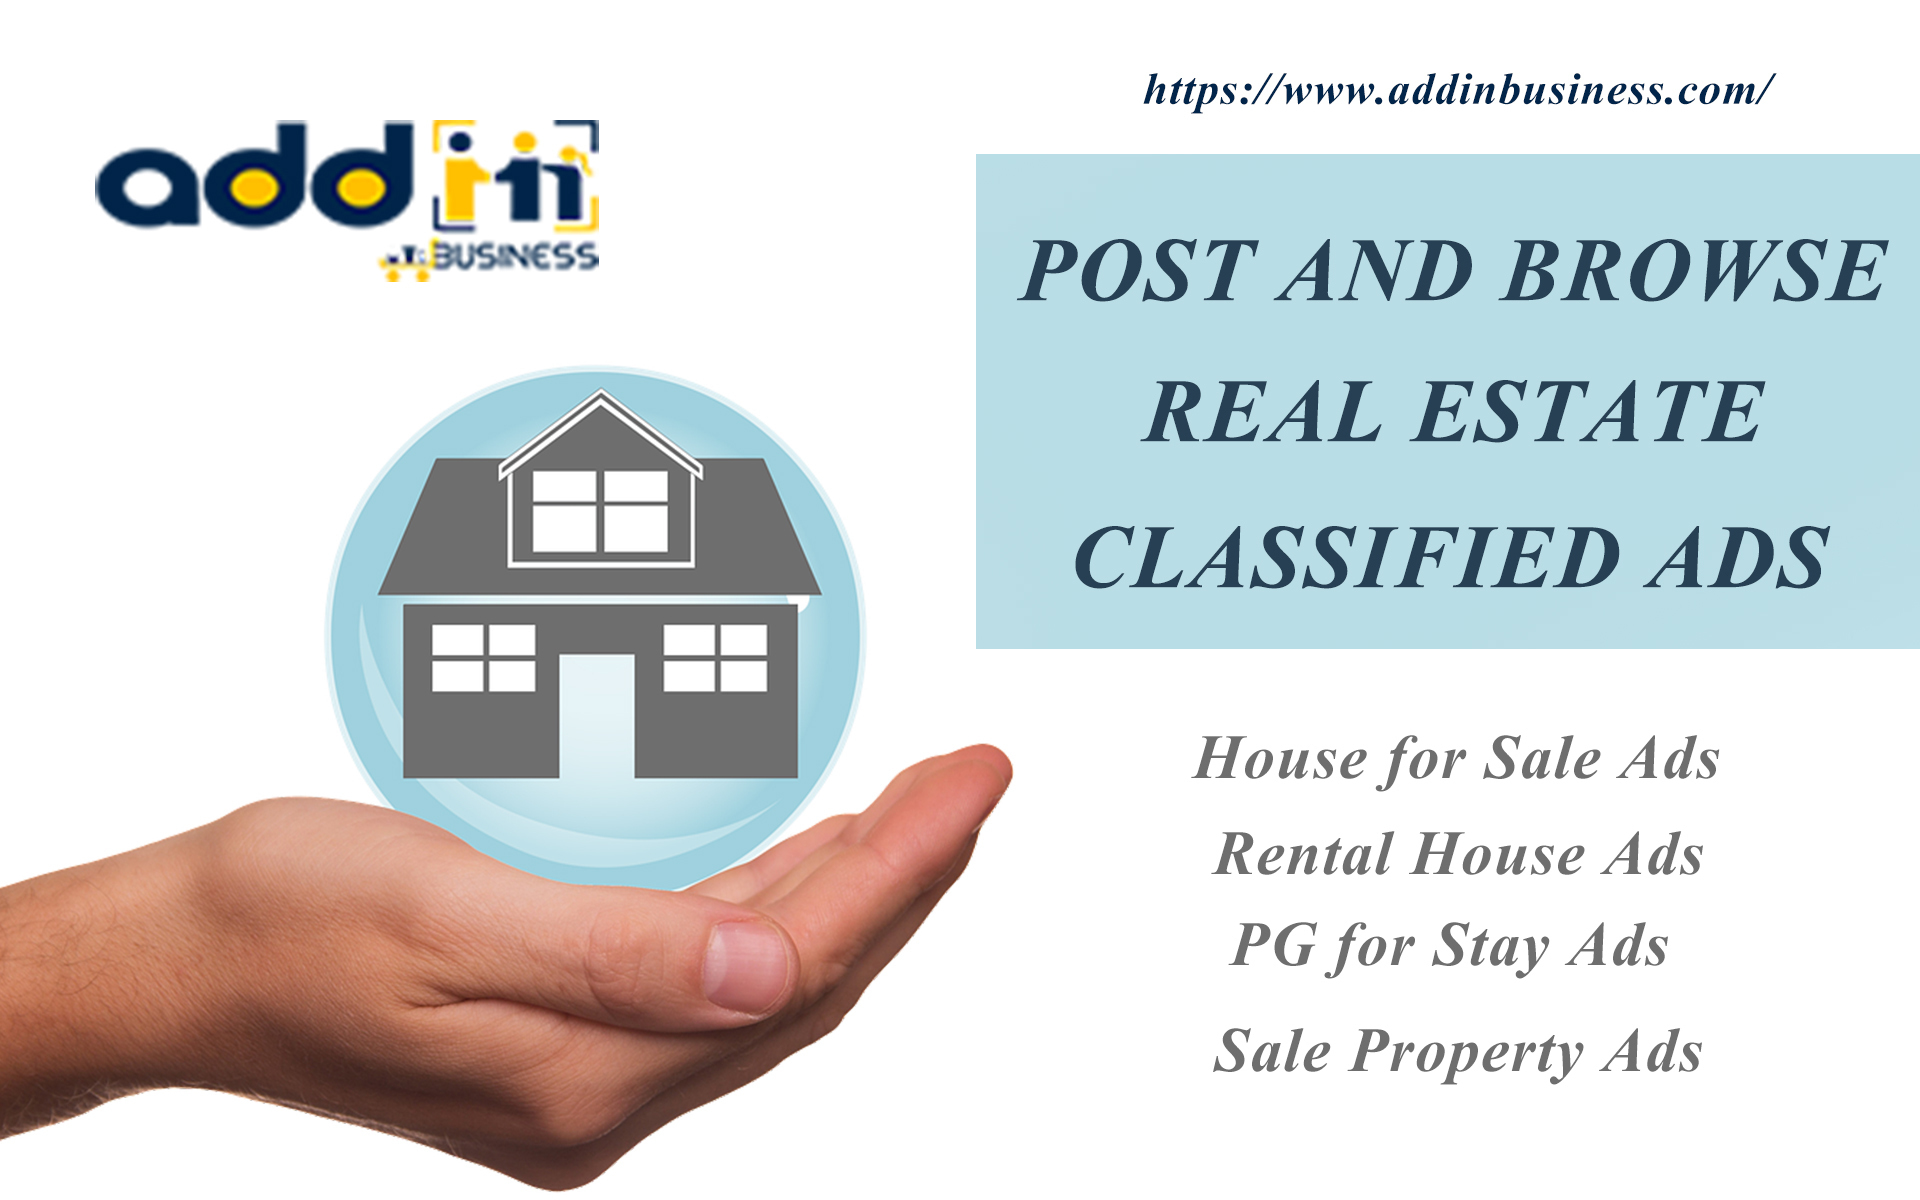 Classified ads. Real Estate classifieds. Real Estate advertisement. Post ads